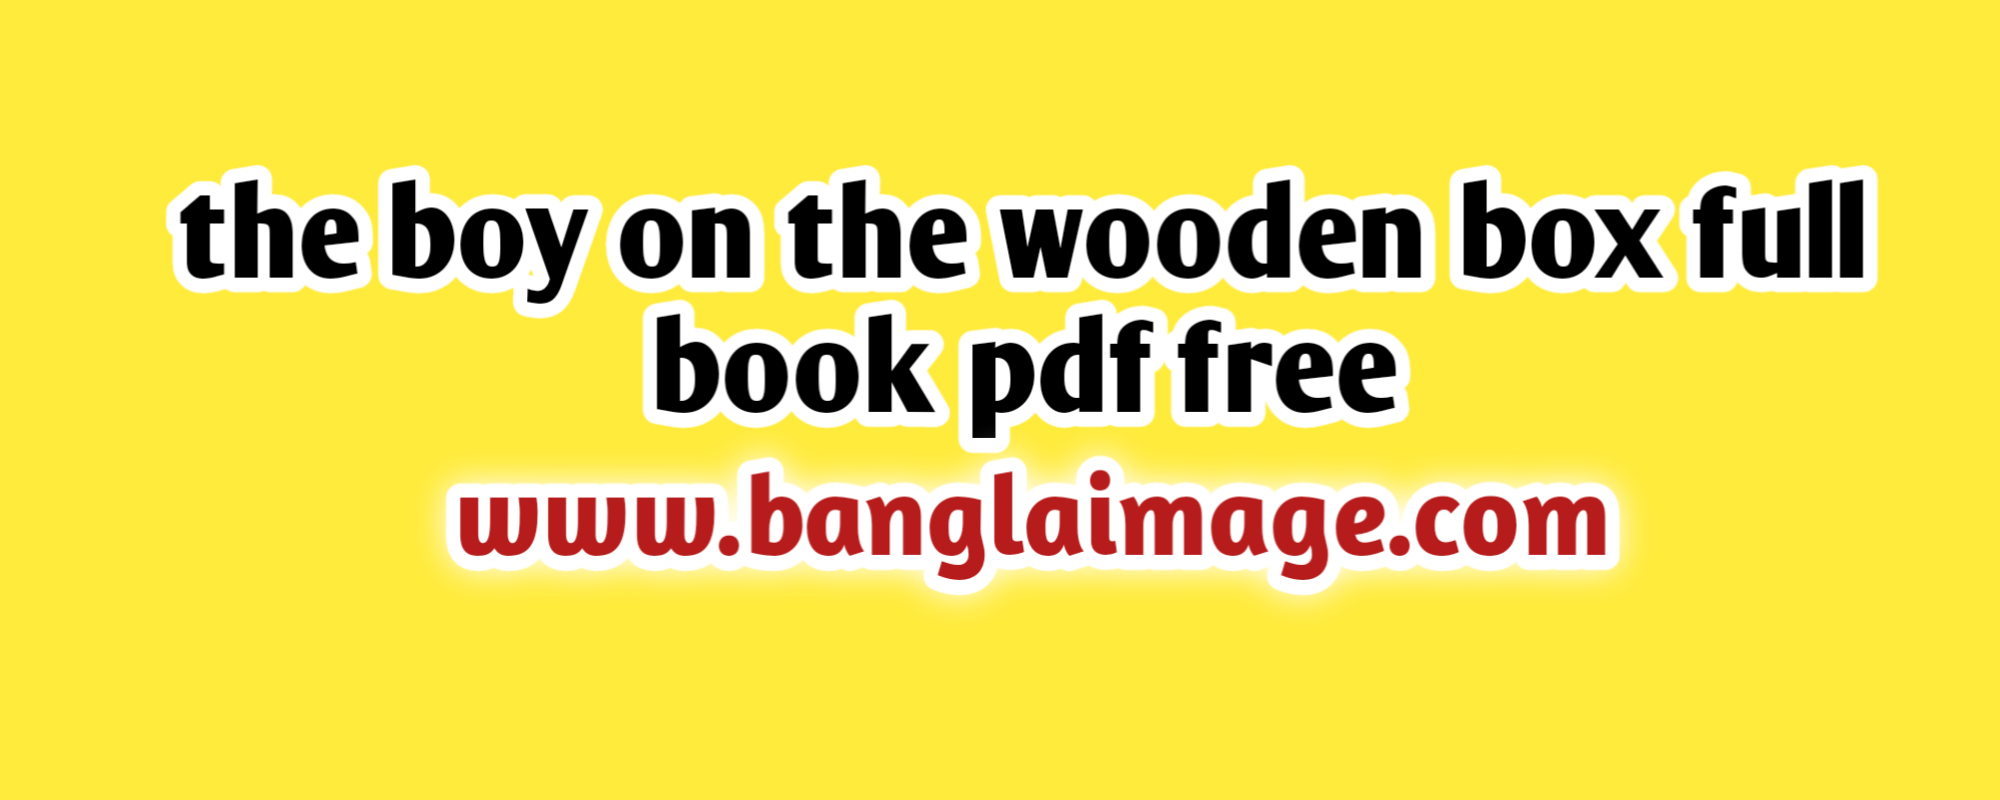 the boy on the wooden box full book pdf free,the boy on the wooden box full book pdf free drive file, the boy on the wooden box full book pdf free now, thethe boy on the wooden box full book pdf free drive file